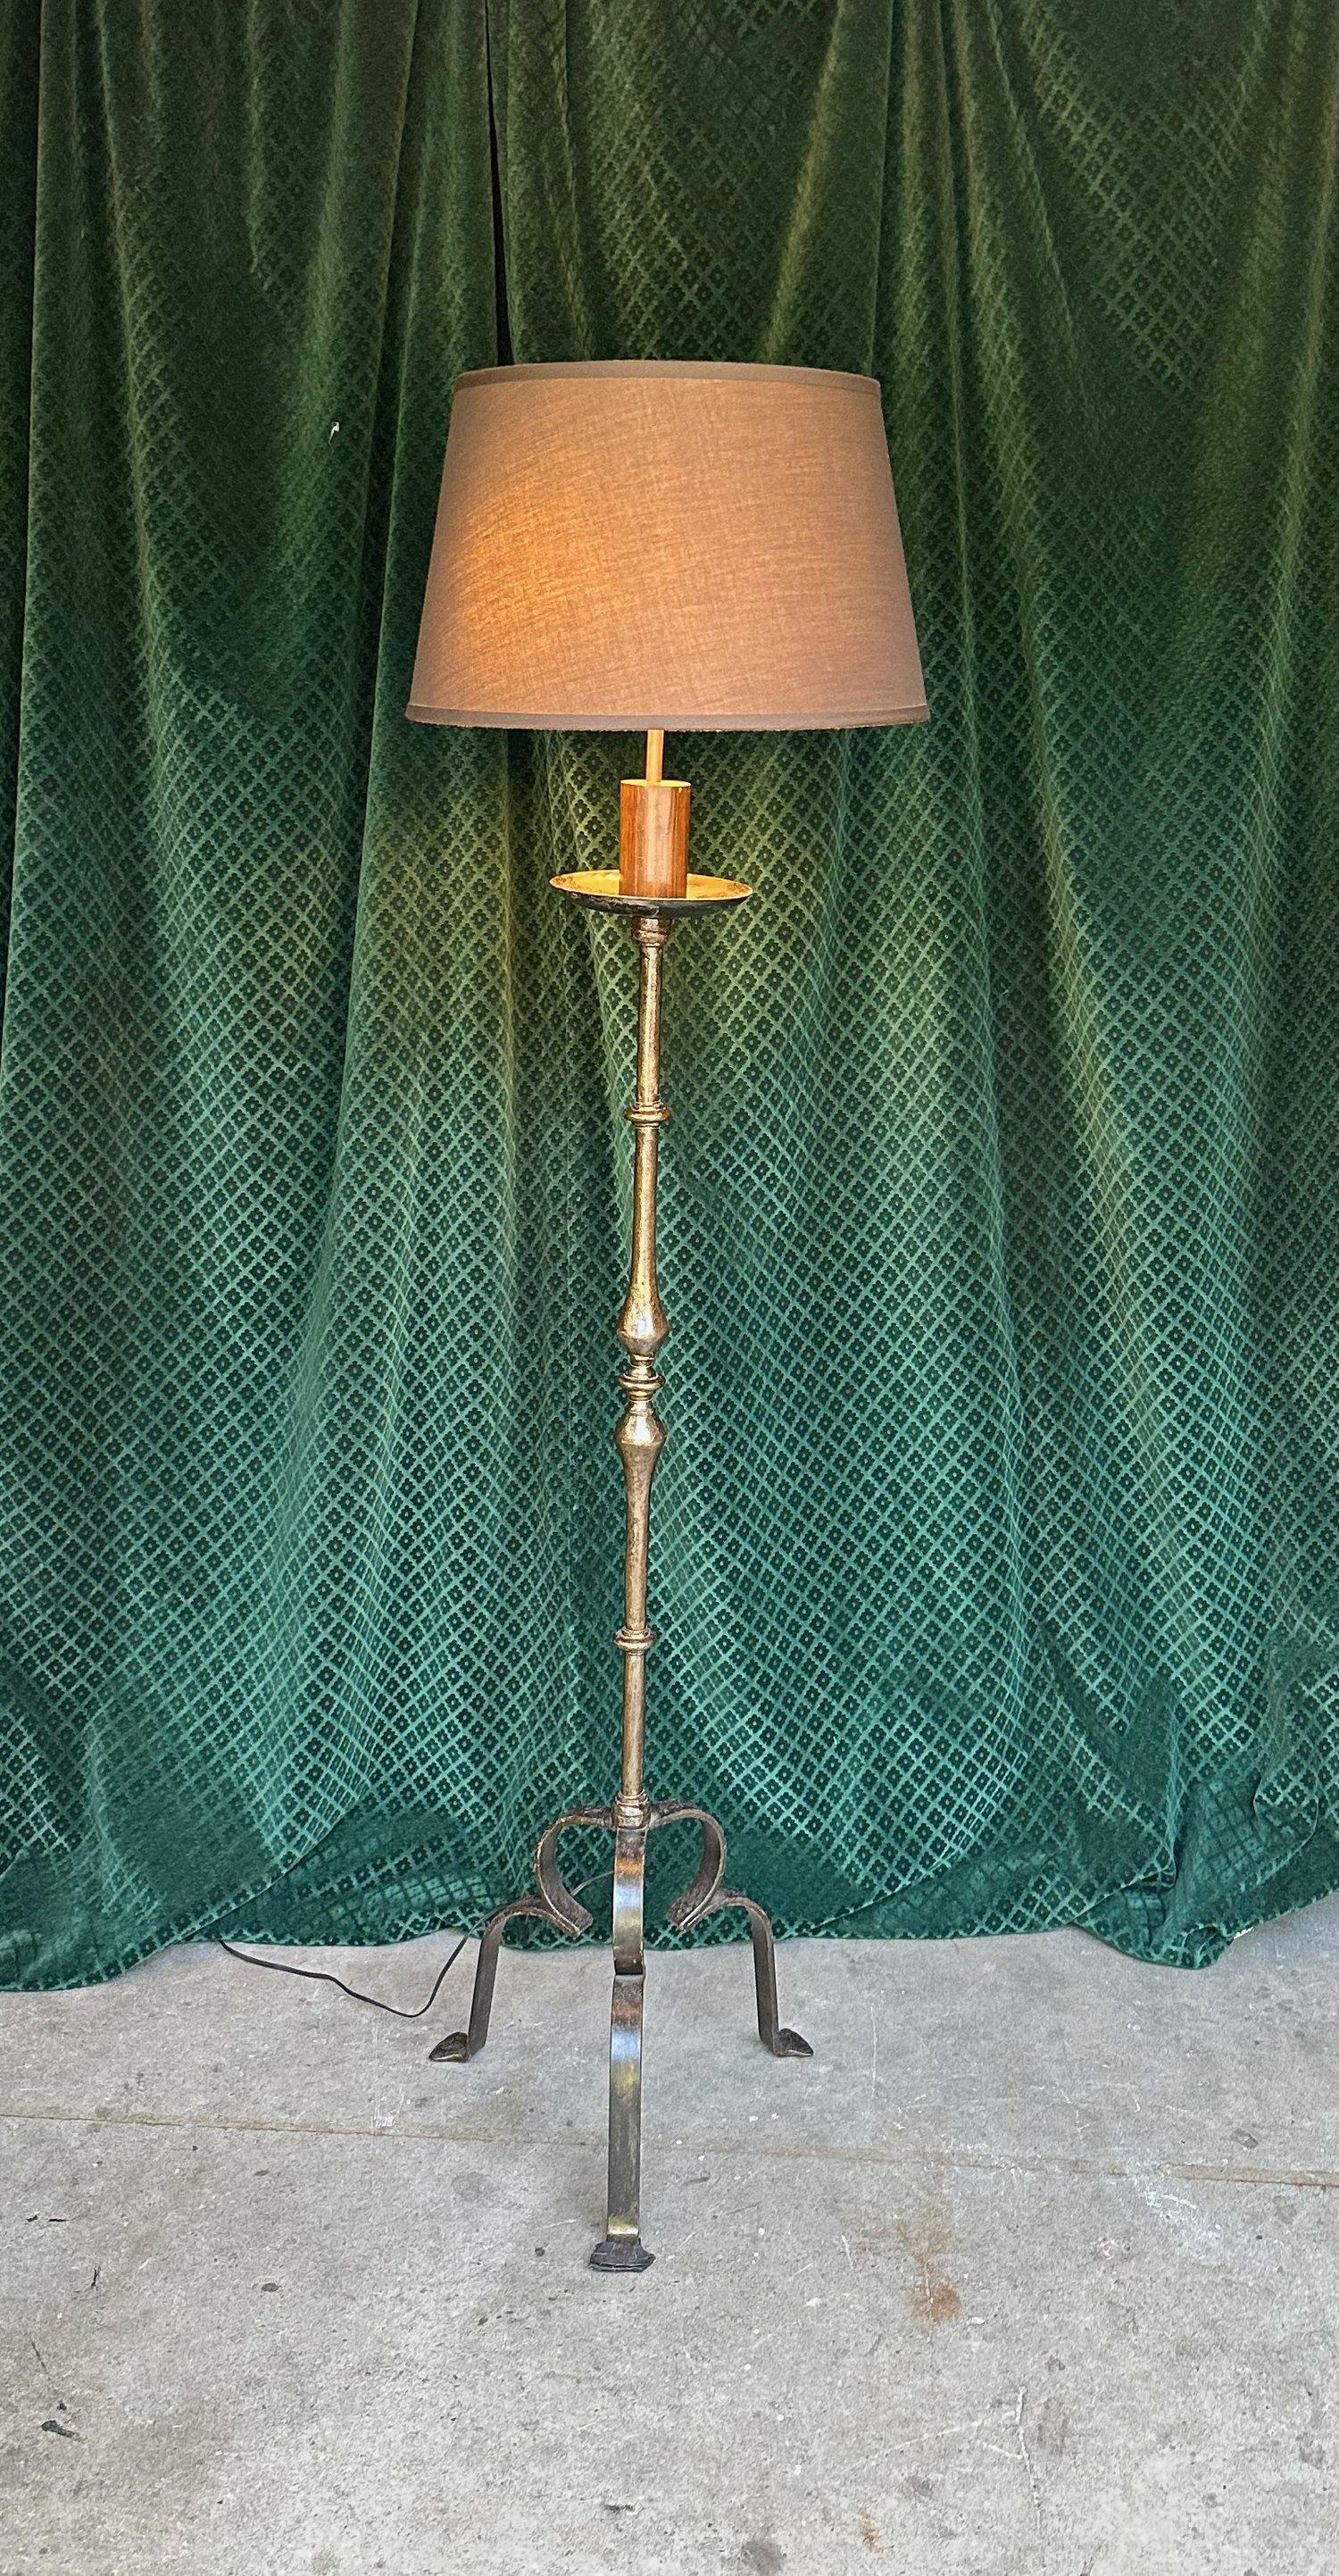 This remarkable wrought iron floor lamp is a striking embodiment of elegance and allure. Possessing a robust feel and a solid tripod base, the lamp reaches an impressive height of 67 inches with a 17 inch diameter base. The iron's rich patina lends